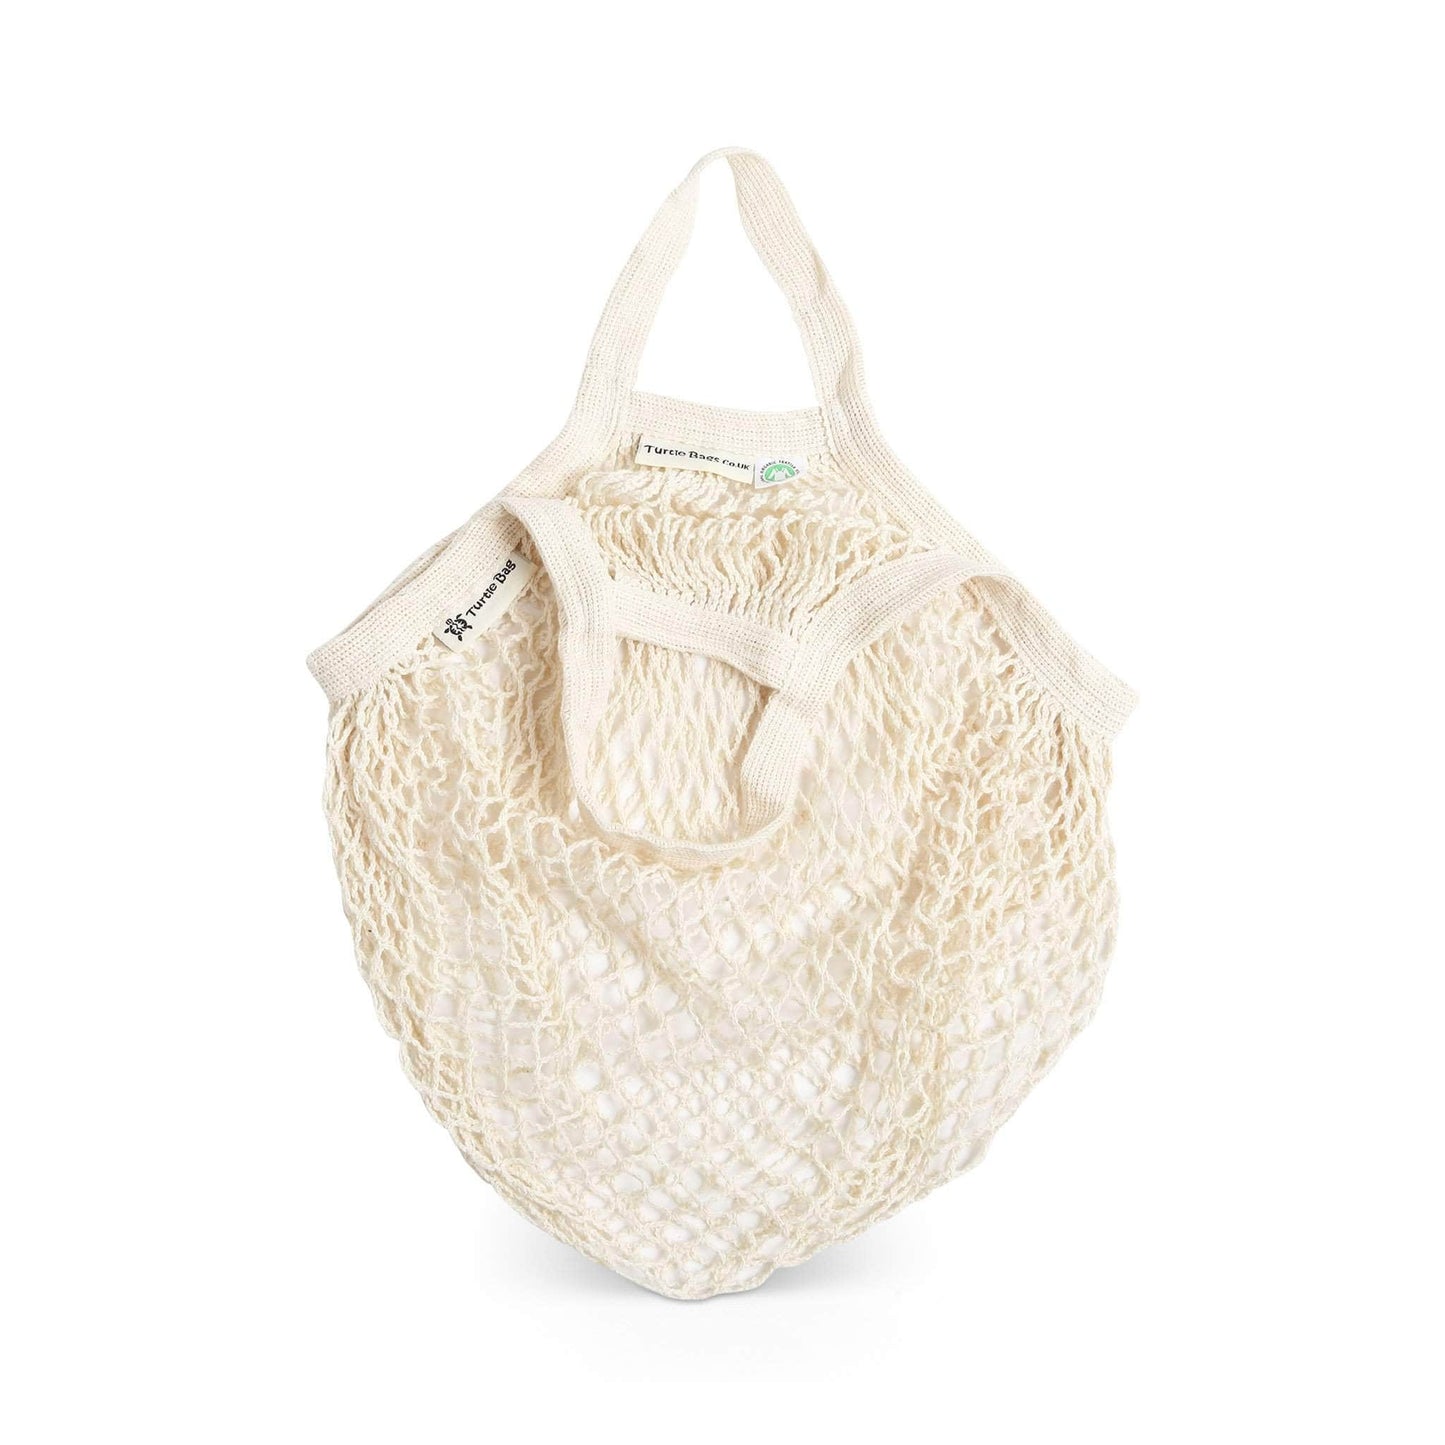 Turtle Bags Shopping Bags Turtle Bags - Shorthandled String Bags - Natural